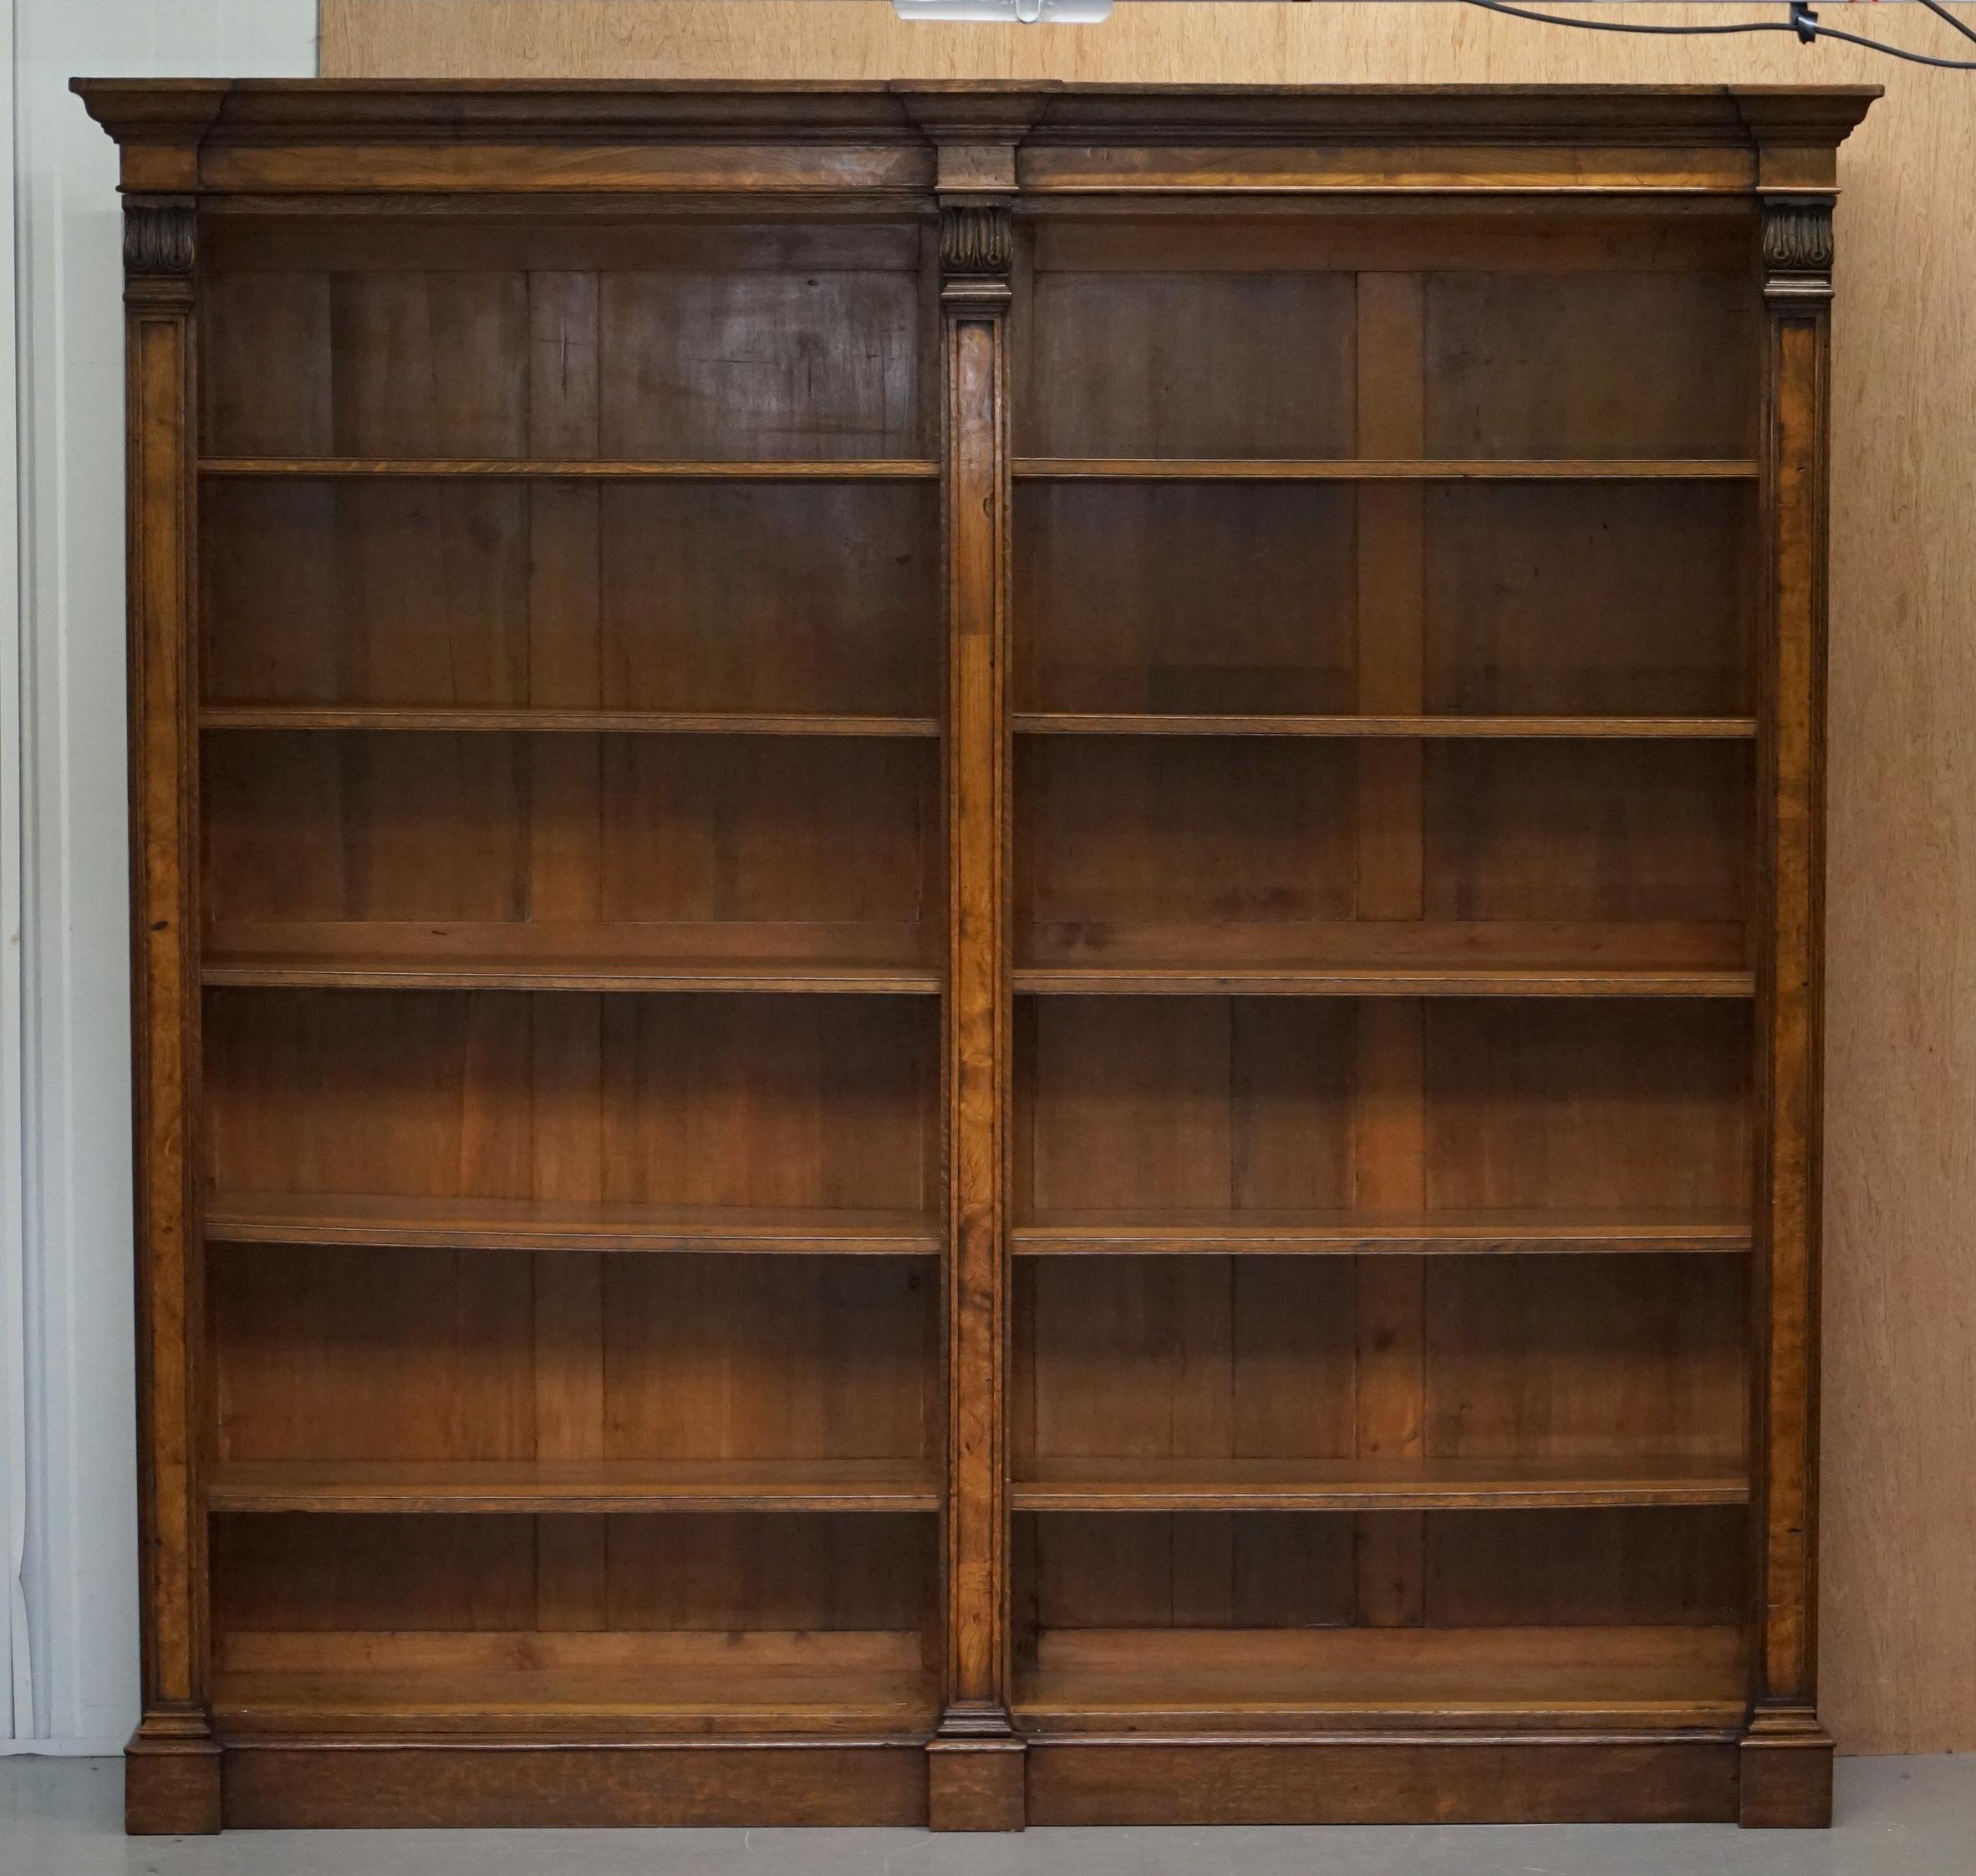 We are delighted to offer for sale this lovely handmade in England Victorian paneled Pollard oak open library bookcase with height adjustable shelves

A very good looking well made and decorative Library bookcase. The piece is in one of my